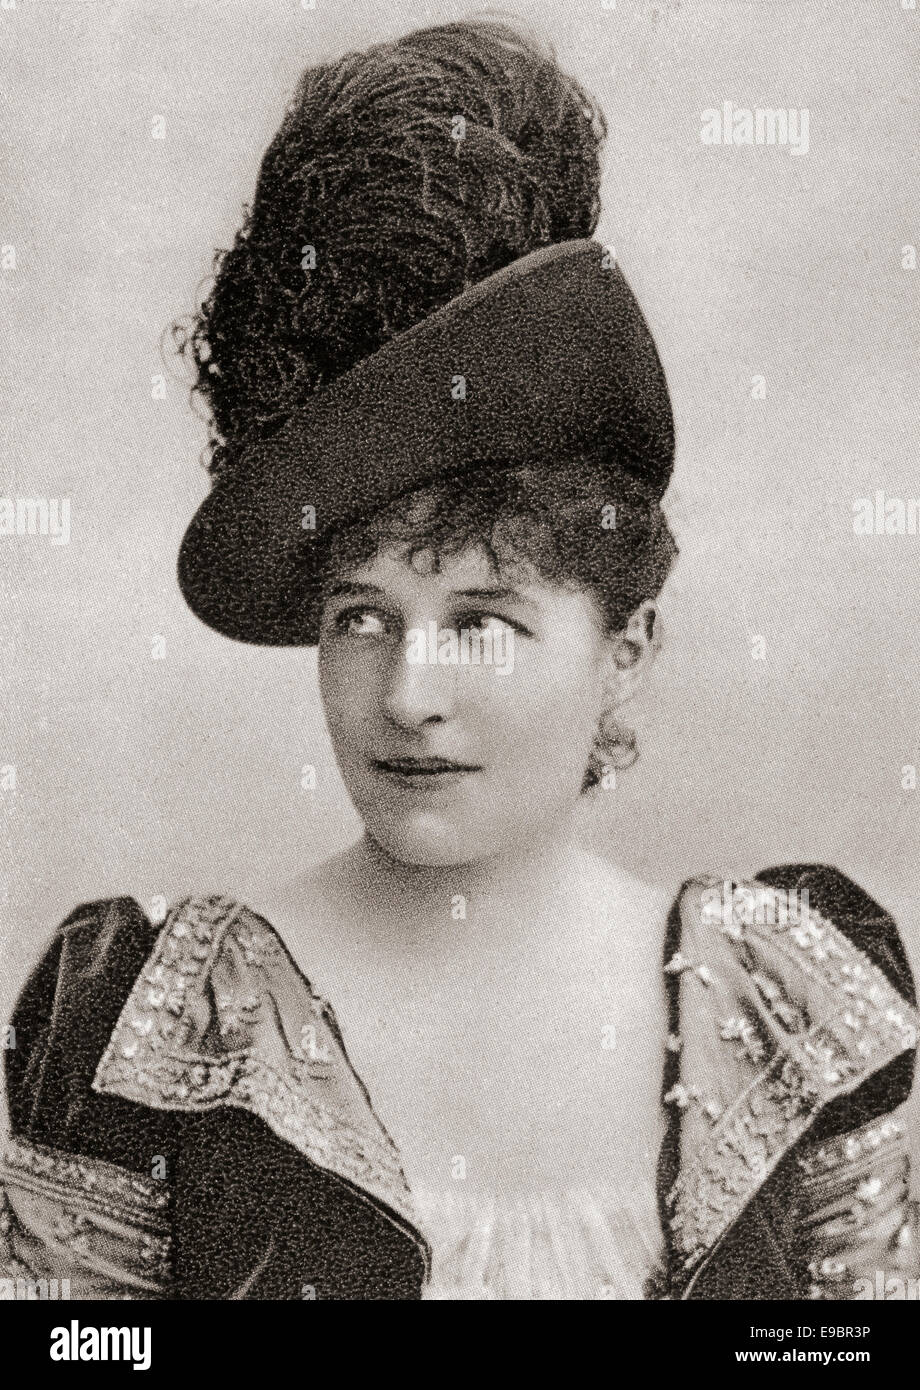 Lillie Langtry, 1853 – 1929, also spelled Lily Langtry, born Emilie Charlotte Le Breton. American actress. Stock Photo